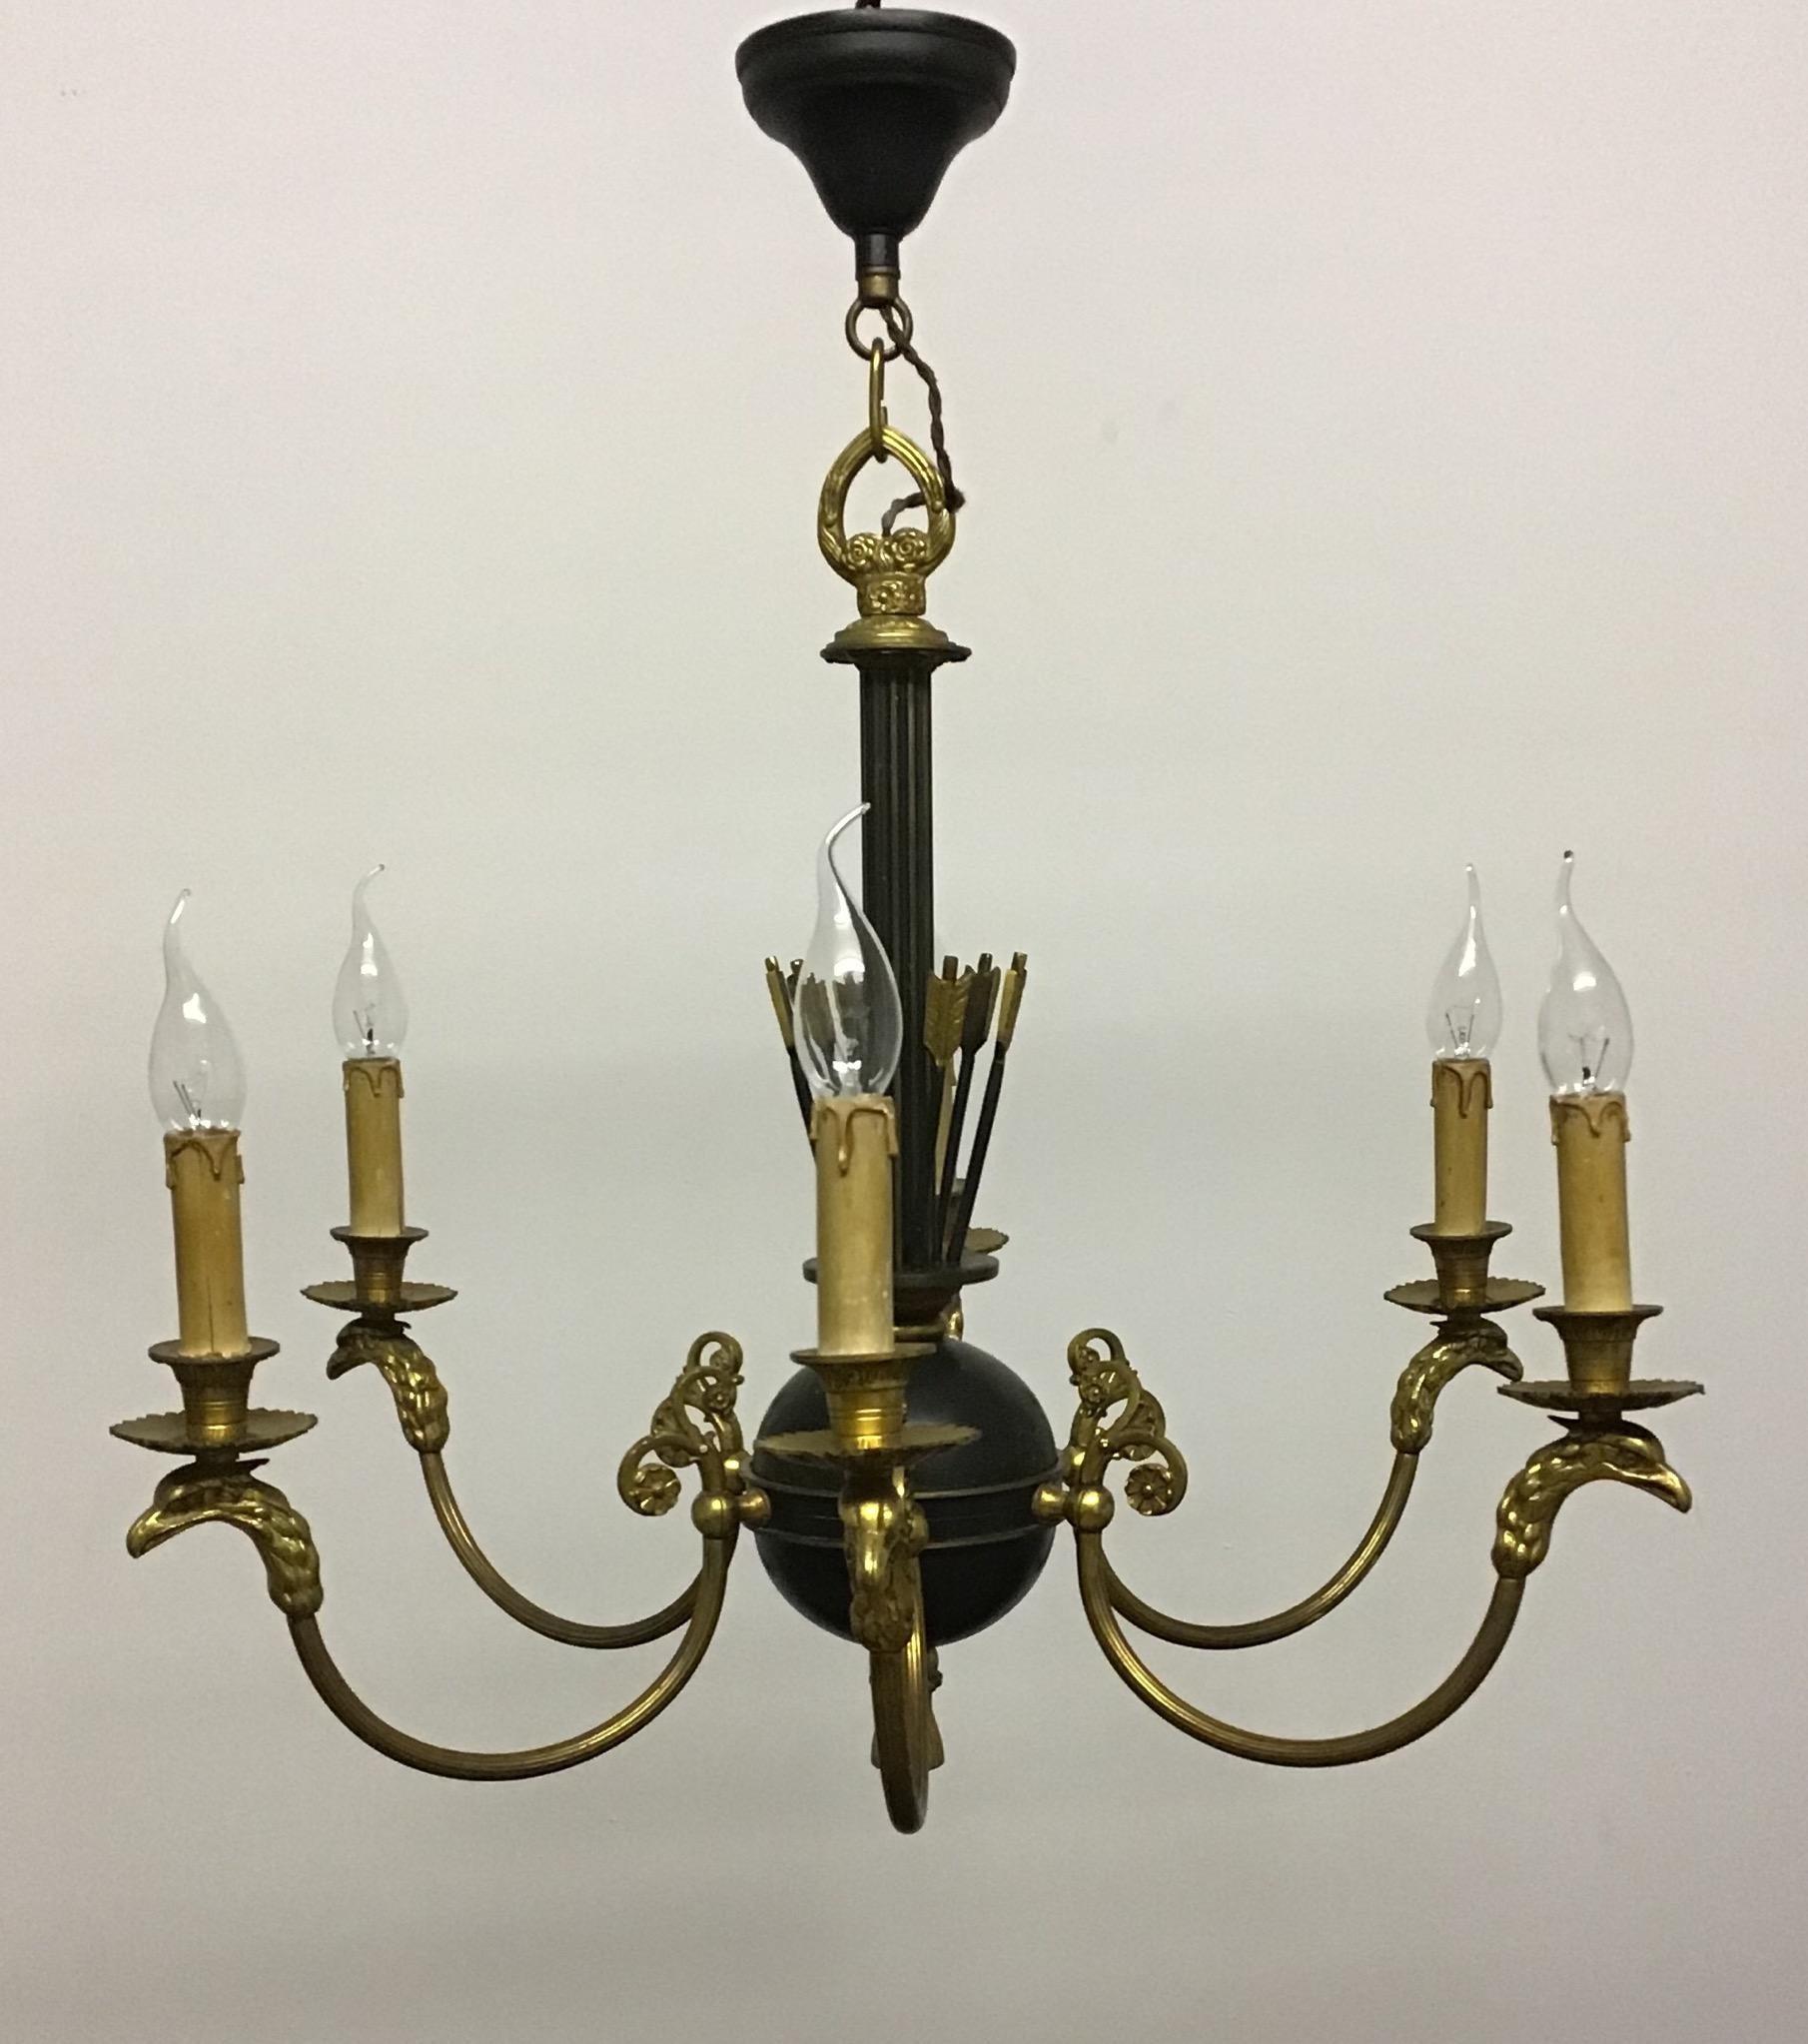 Mid-20th Century French Gilt Bronze Chandelier with Eagle Heads and Arrows, 1930s For Sale